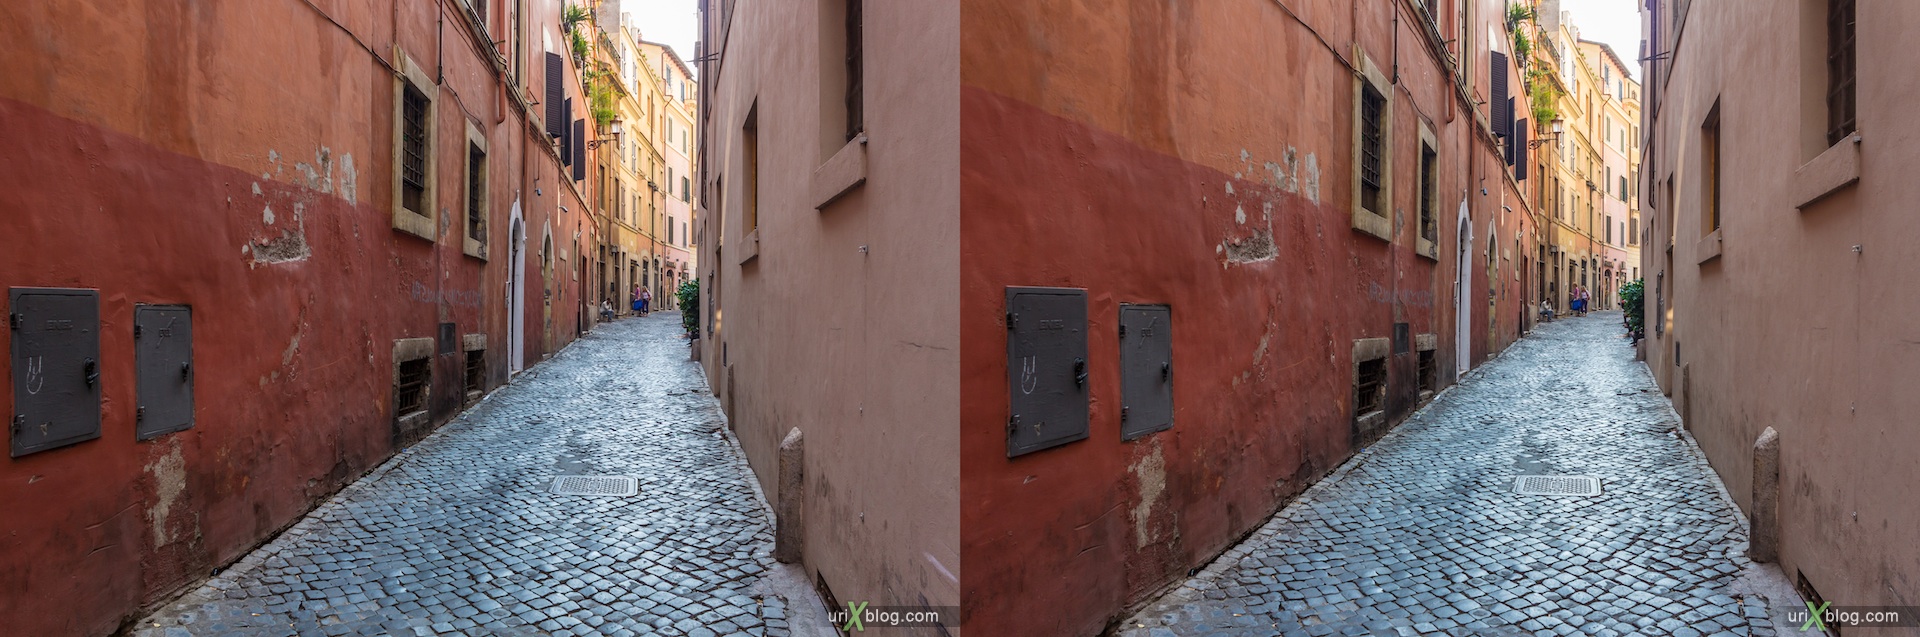 2012, Vicolo Scanderbeg alley, Via del Lavatore street, Rome, Italy, 3D, stereo pair, cross-eyed, crossview, cross view stereo pair